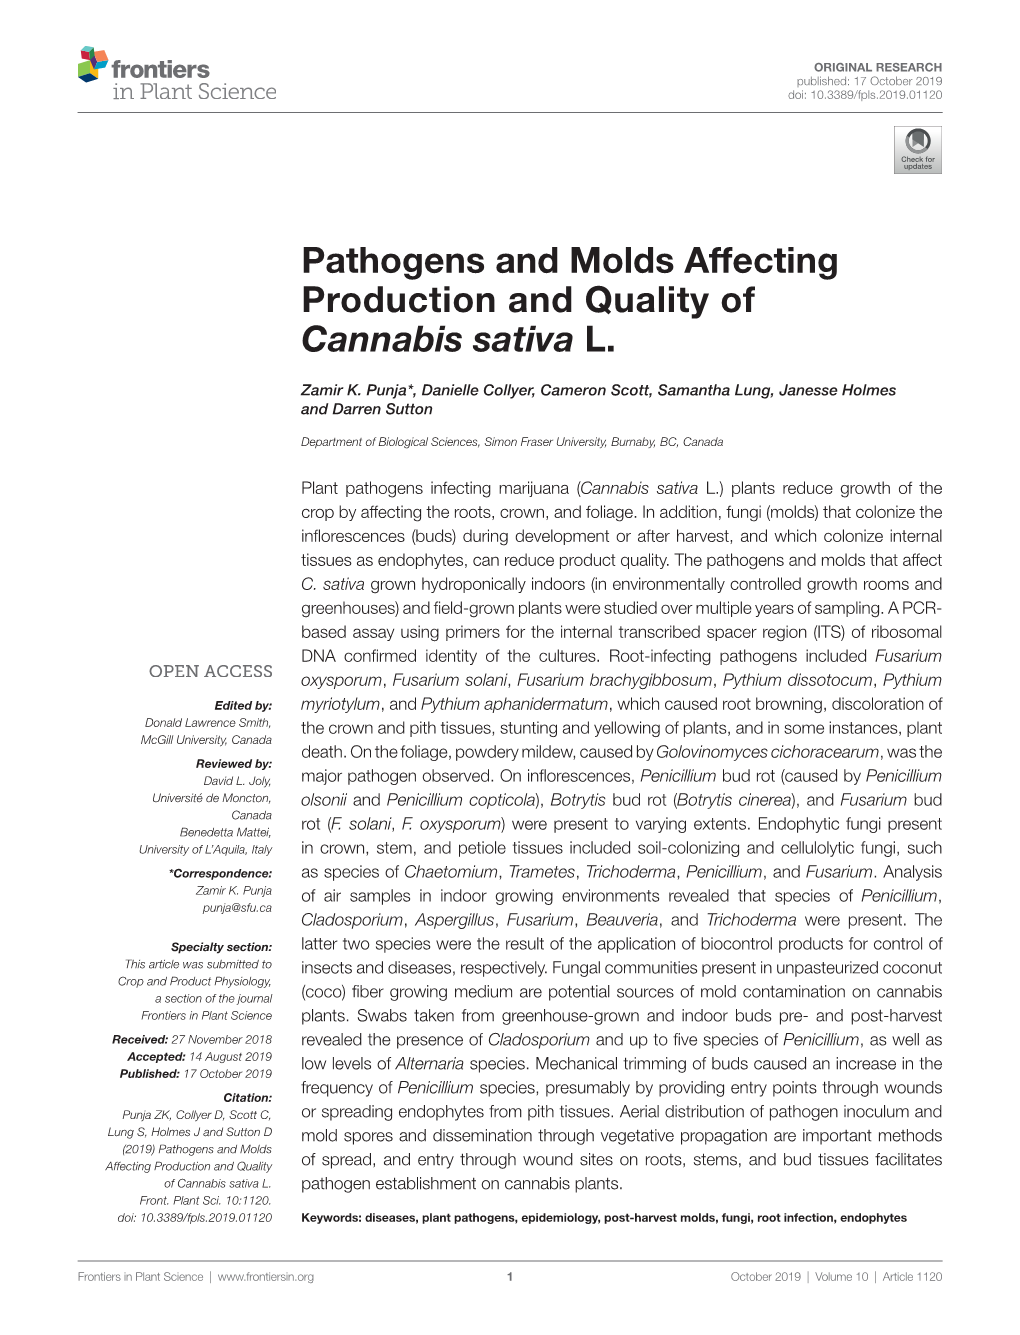 Pathogens and Molds Affecting Production and Quality of Cannabis Sativa L